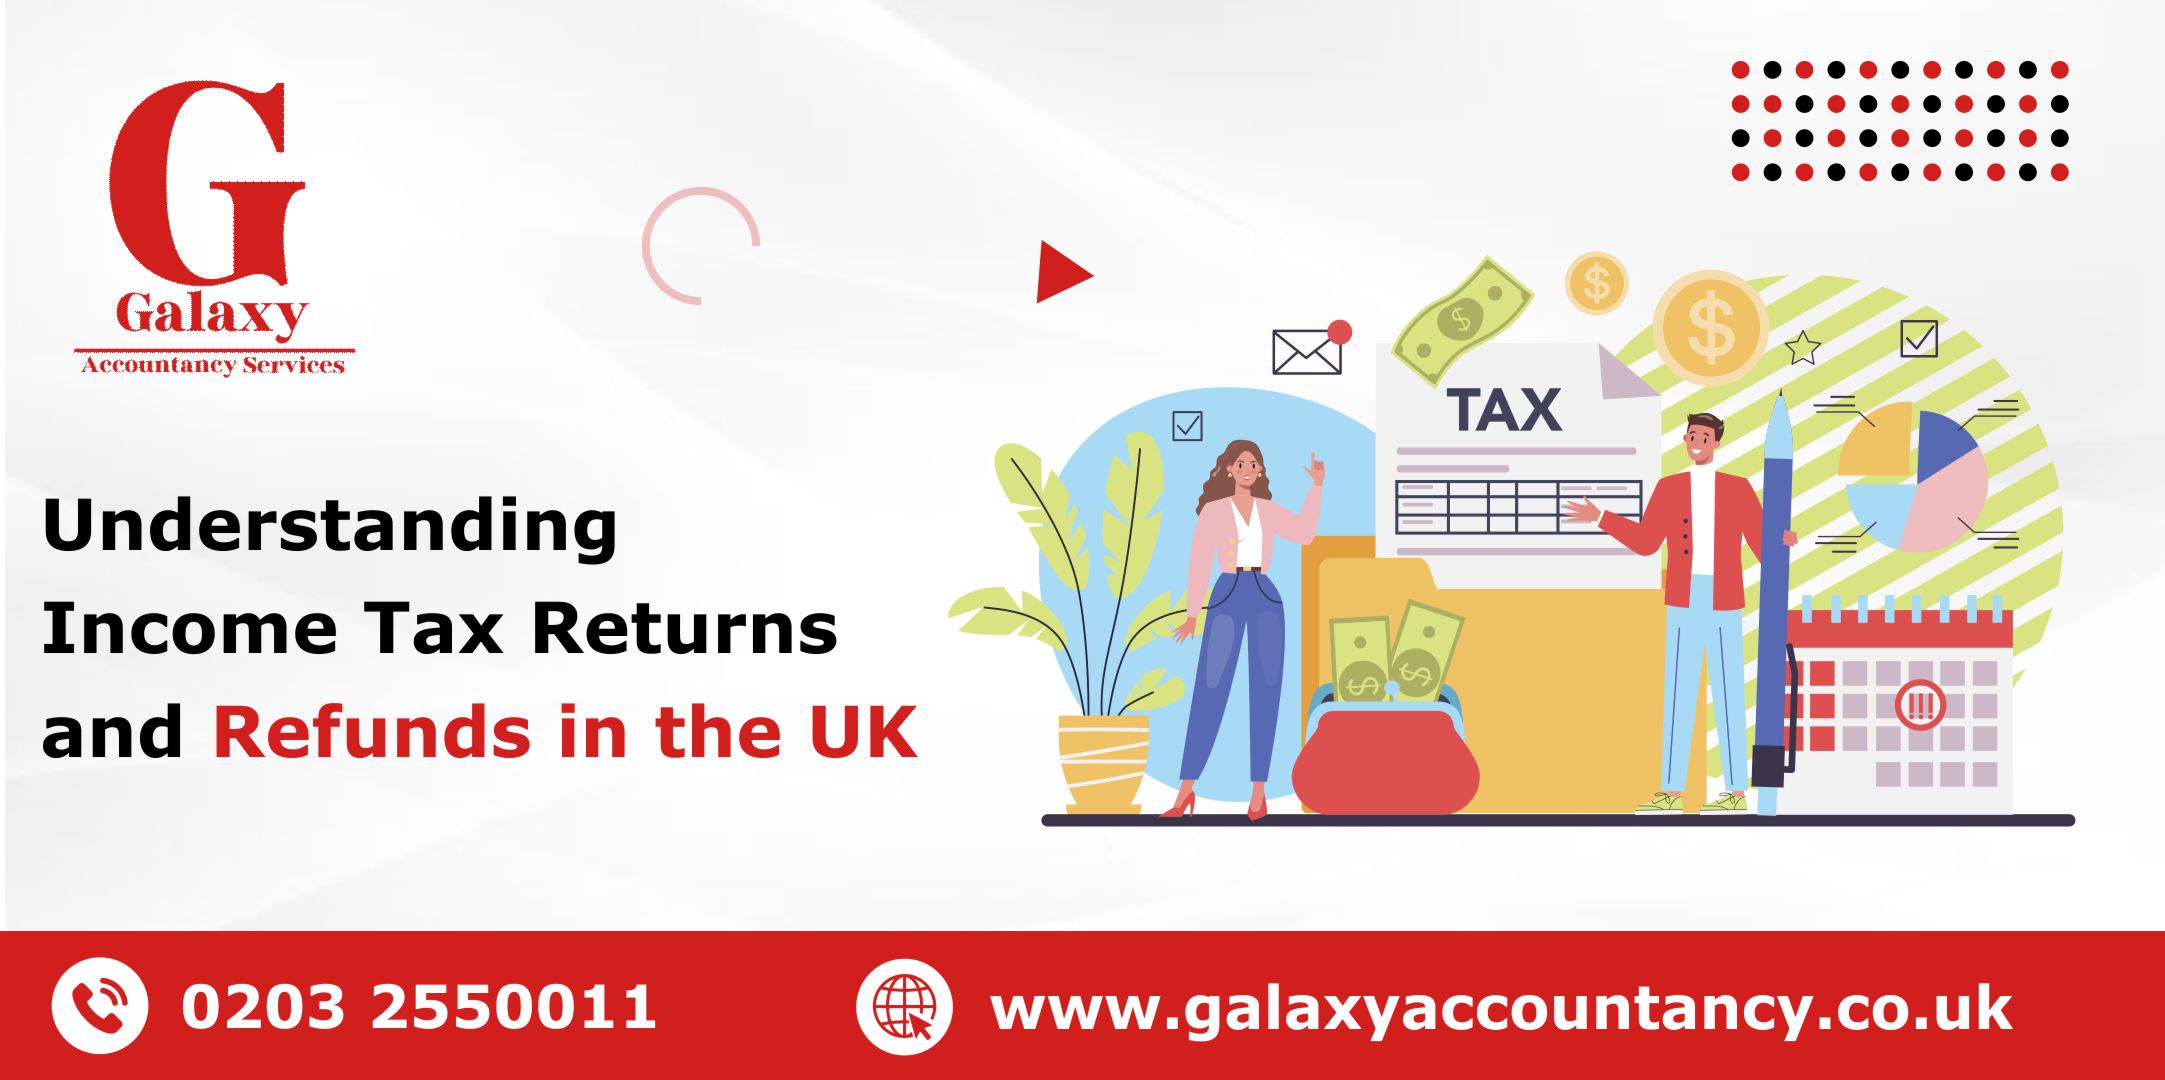 You are currently viewing Understanding Income Tax Returns and Refunds in the UK